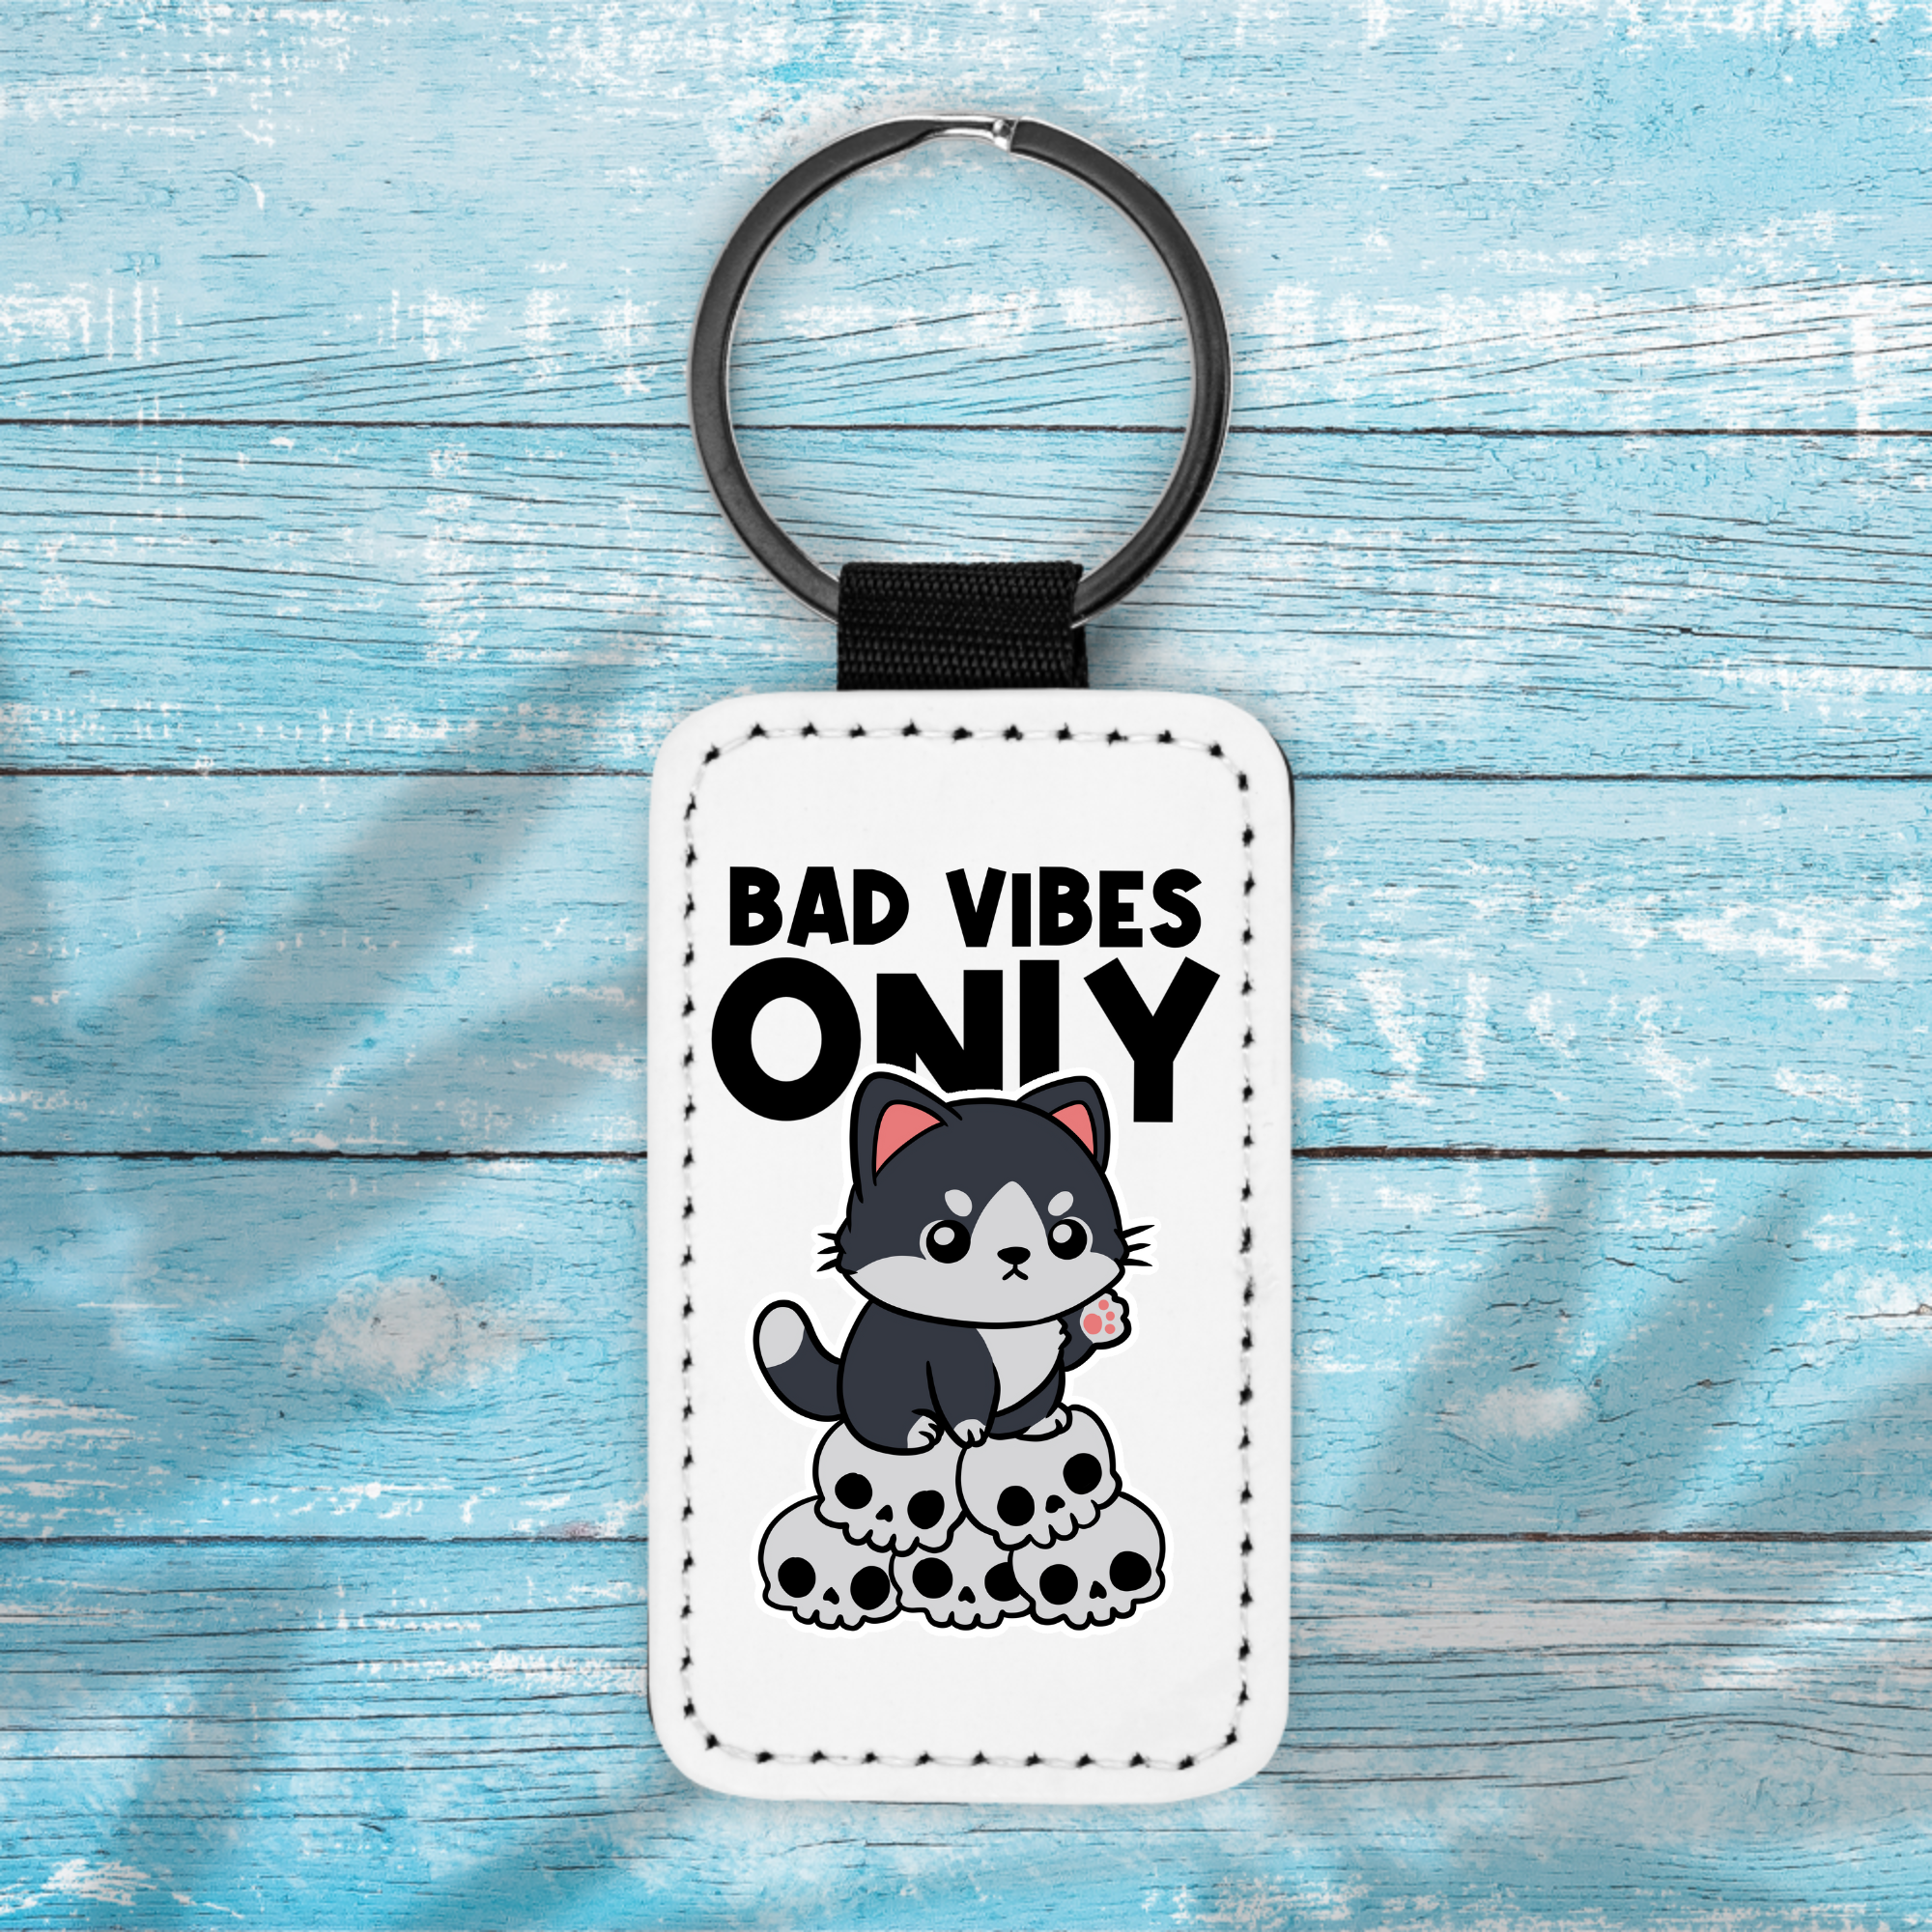 Bad Vibes Only - Key Chain